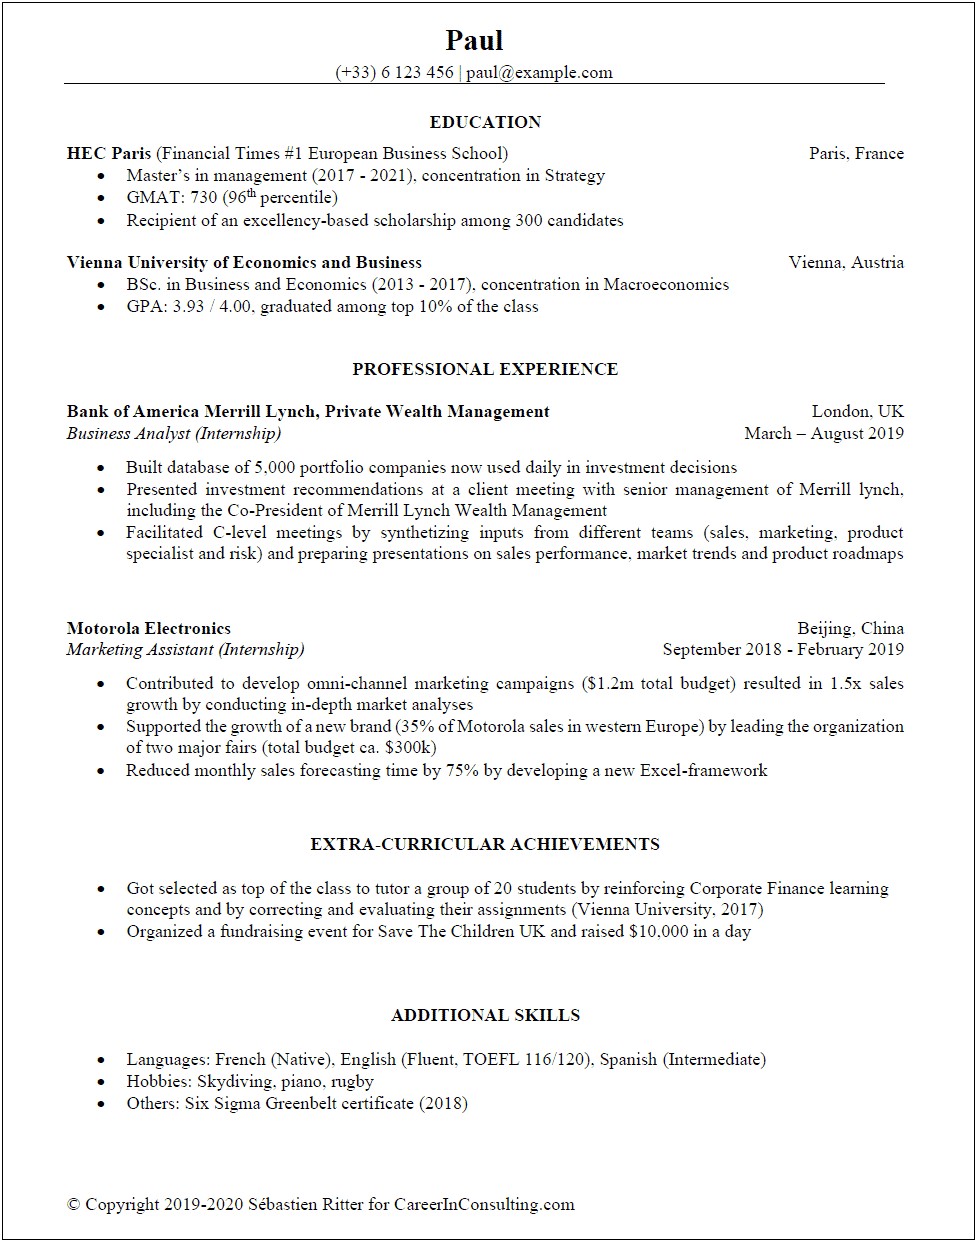 Making My Resume Manager Focused